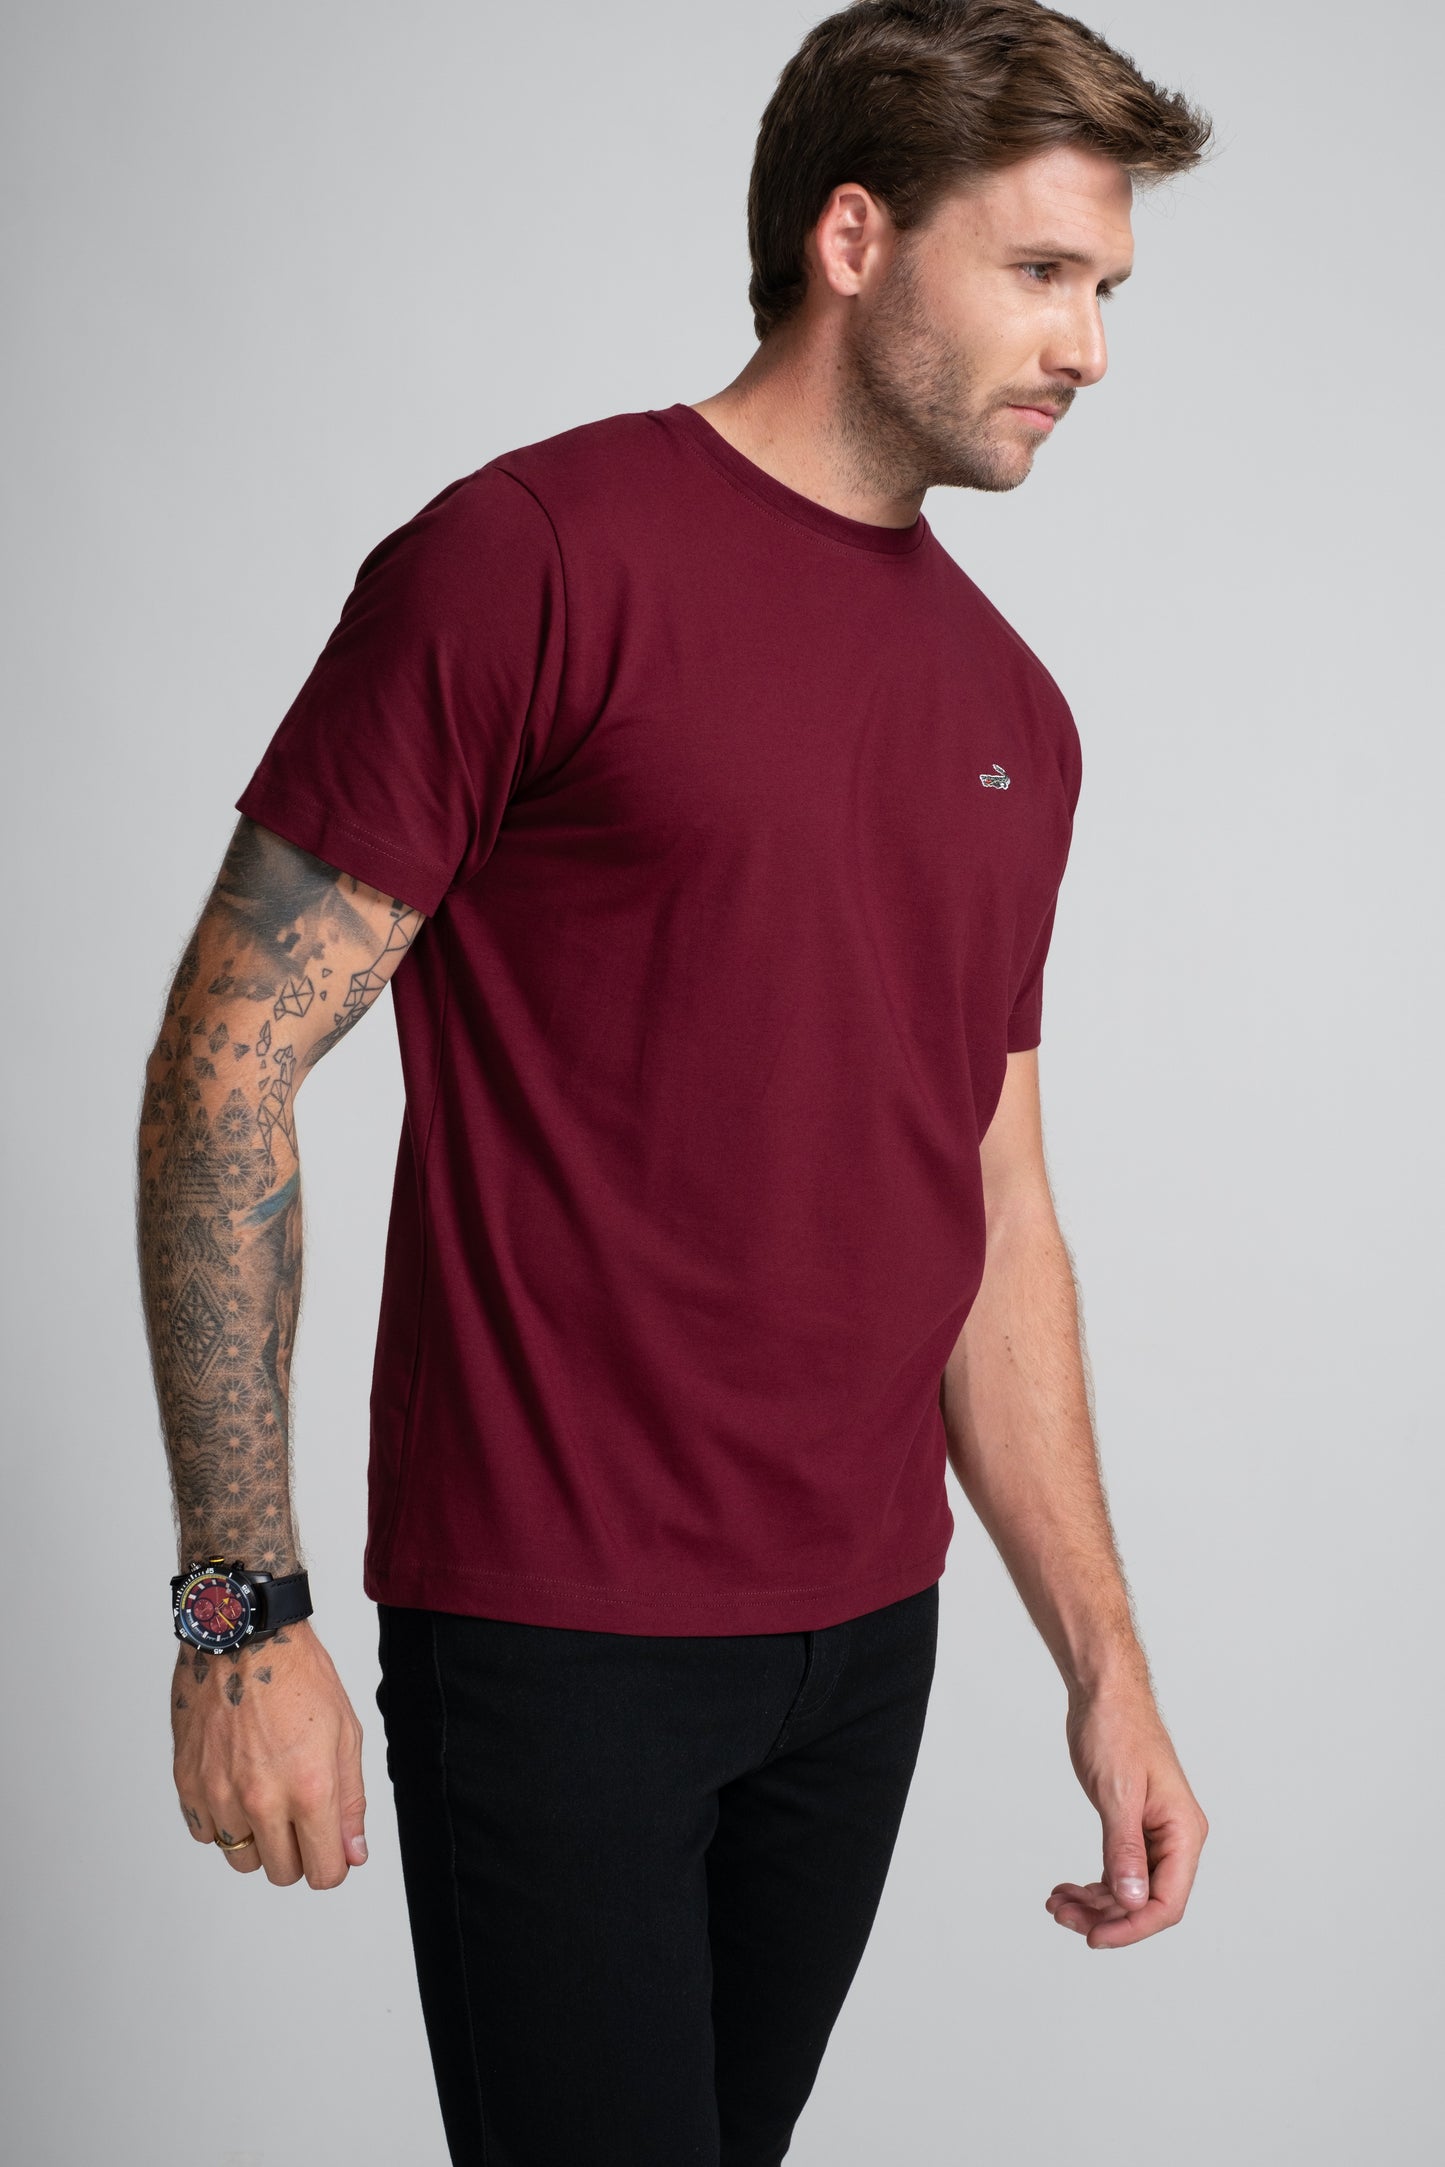 Classic Fit Short sleeves-CasualCrew Neck - Windsor Wine